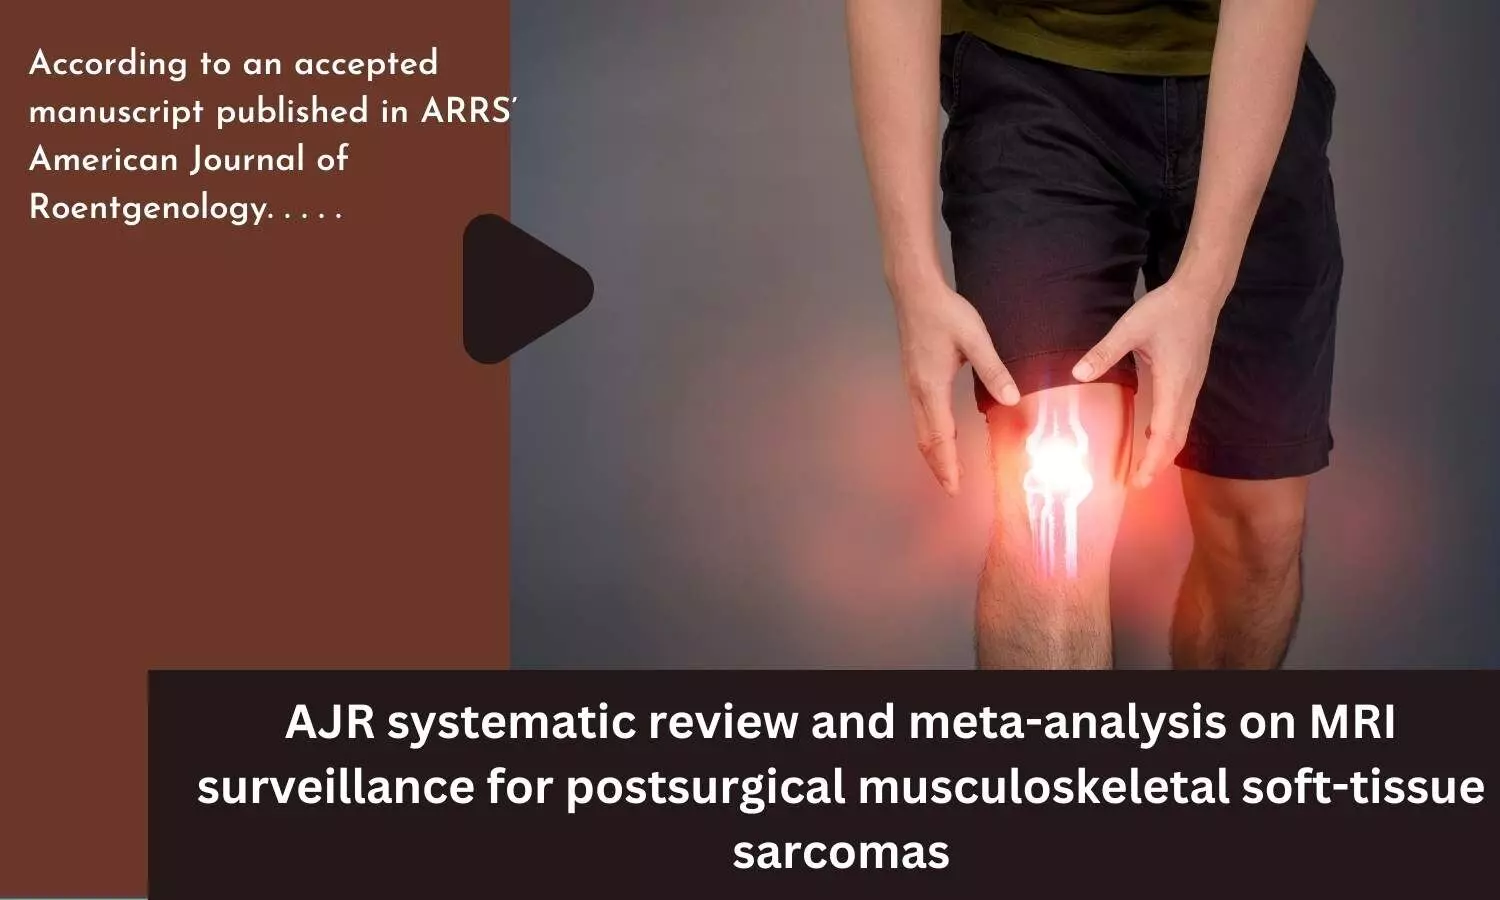 AJR systematic review and meta-analysis on MRI surveillance for postsurgical musculoskeletal soft-tissue sarcomas